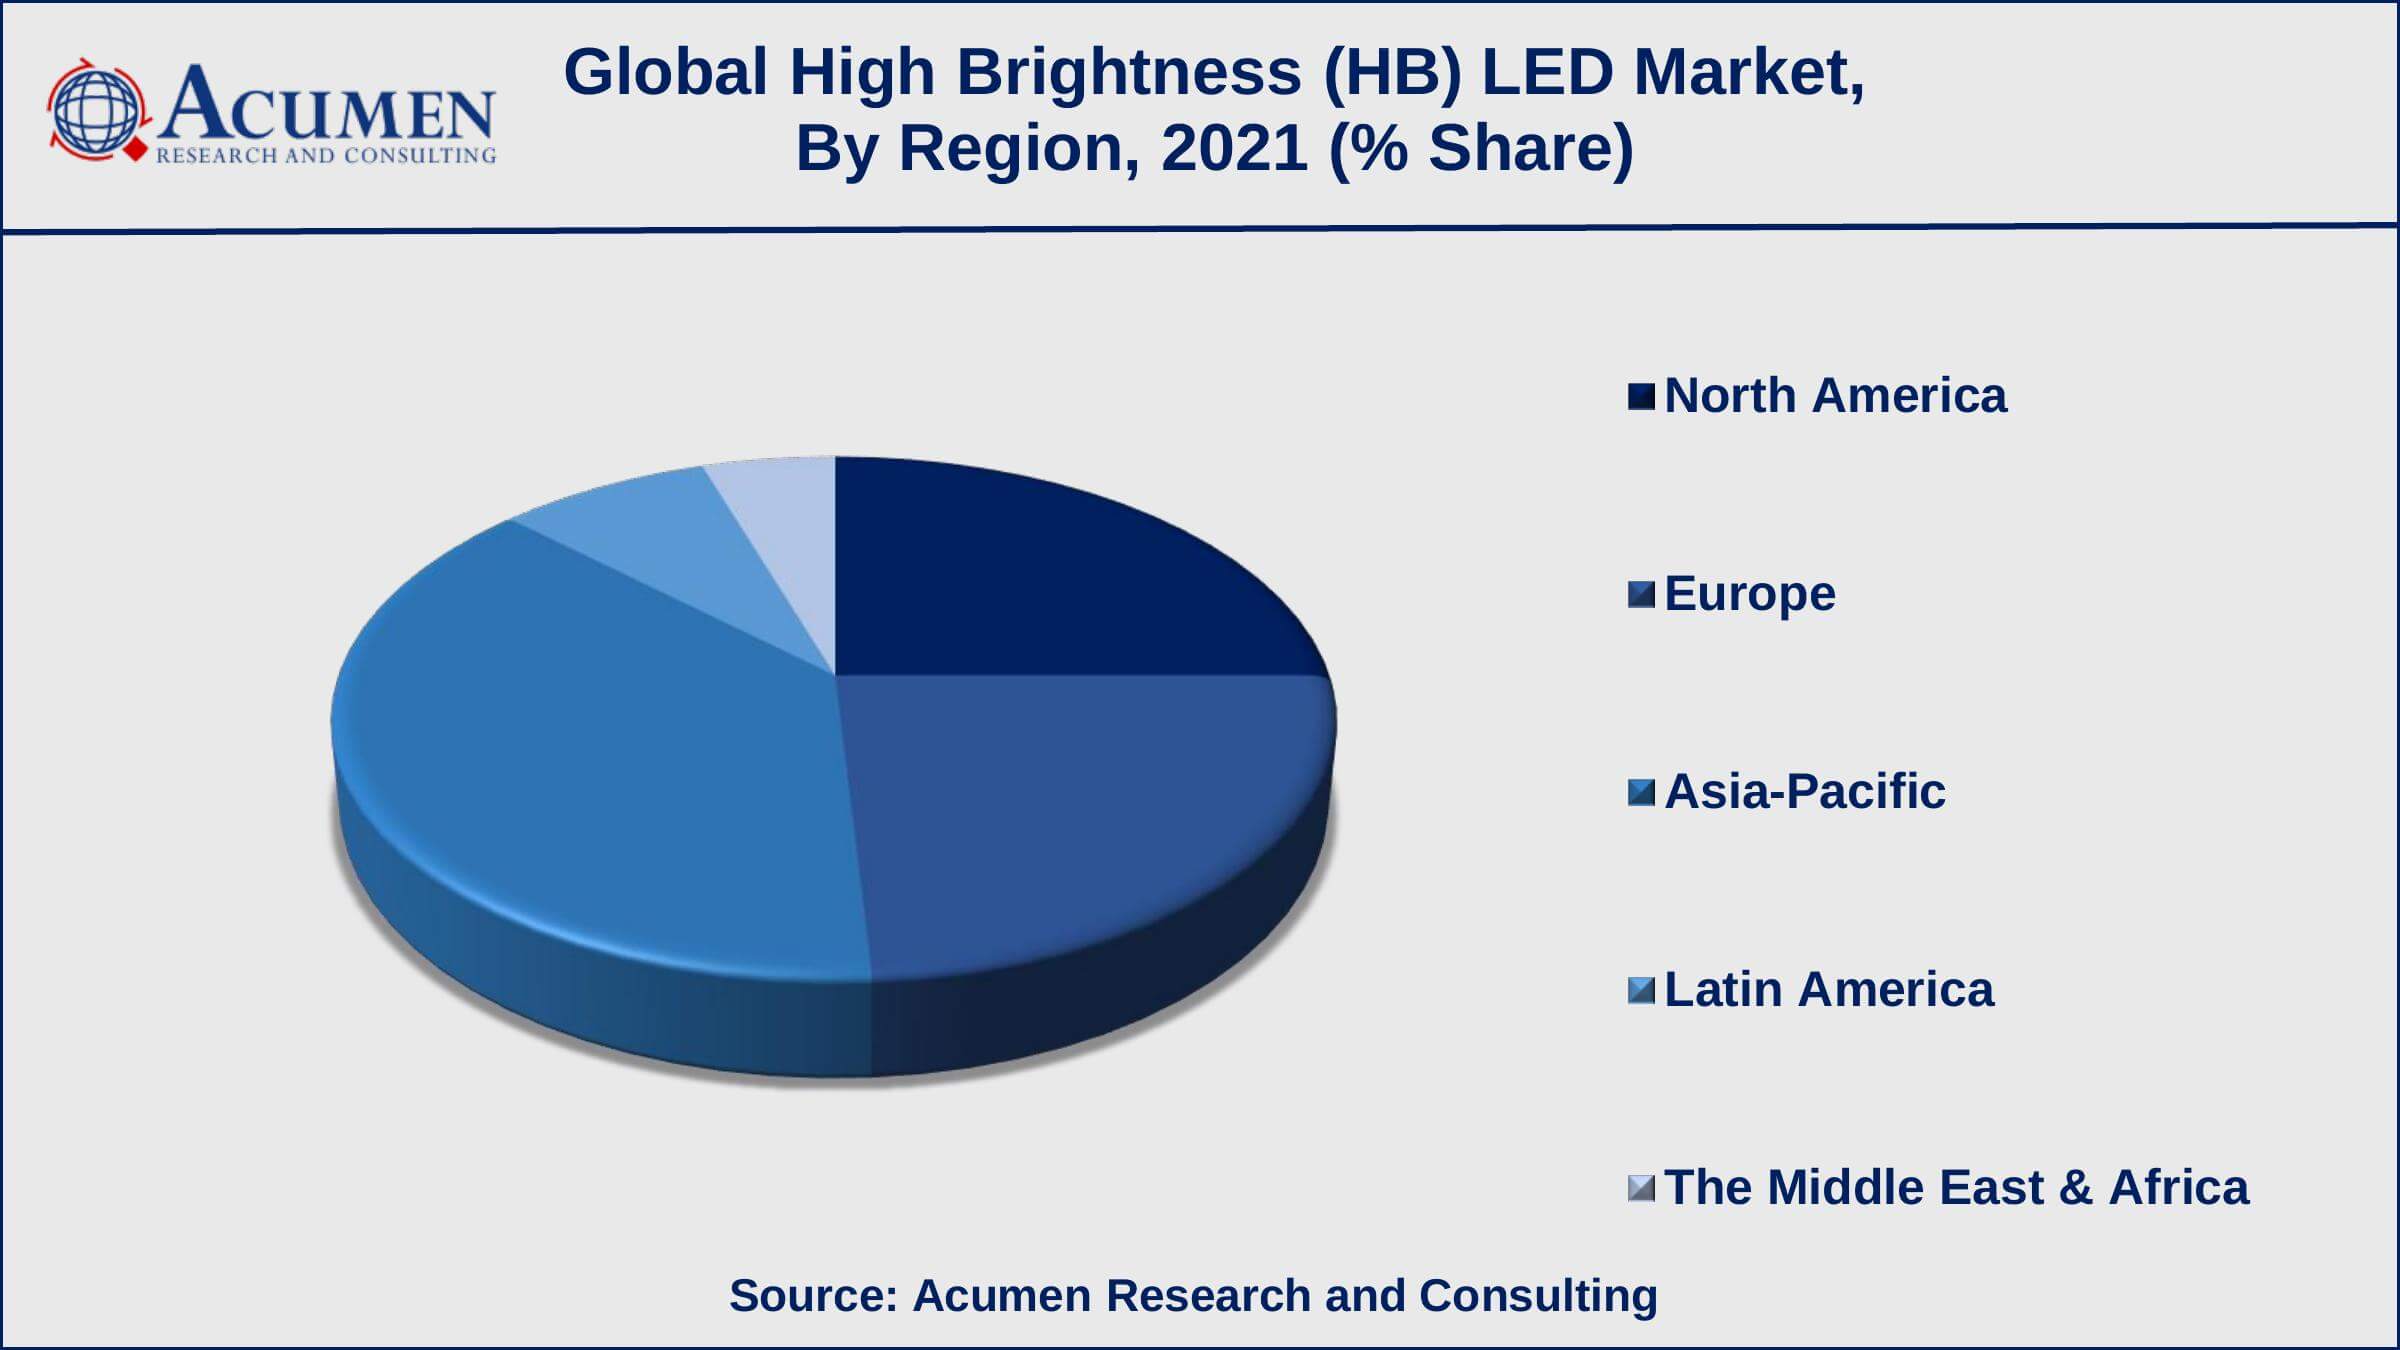 Growing demand for smart-lighting systems is a prominent high brightness LED market trend that fuels the industry demand